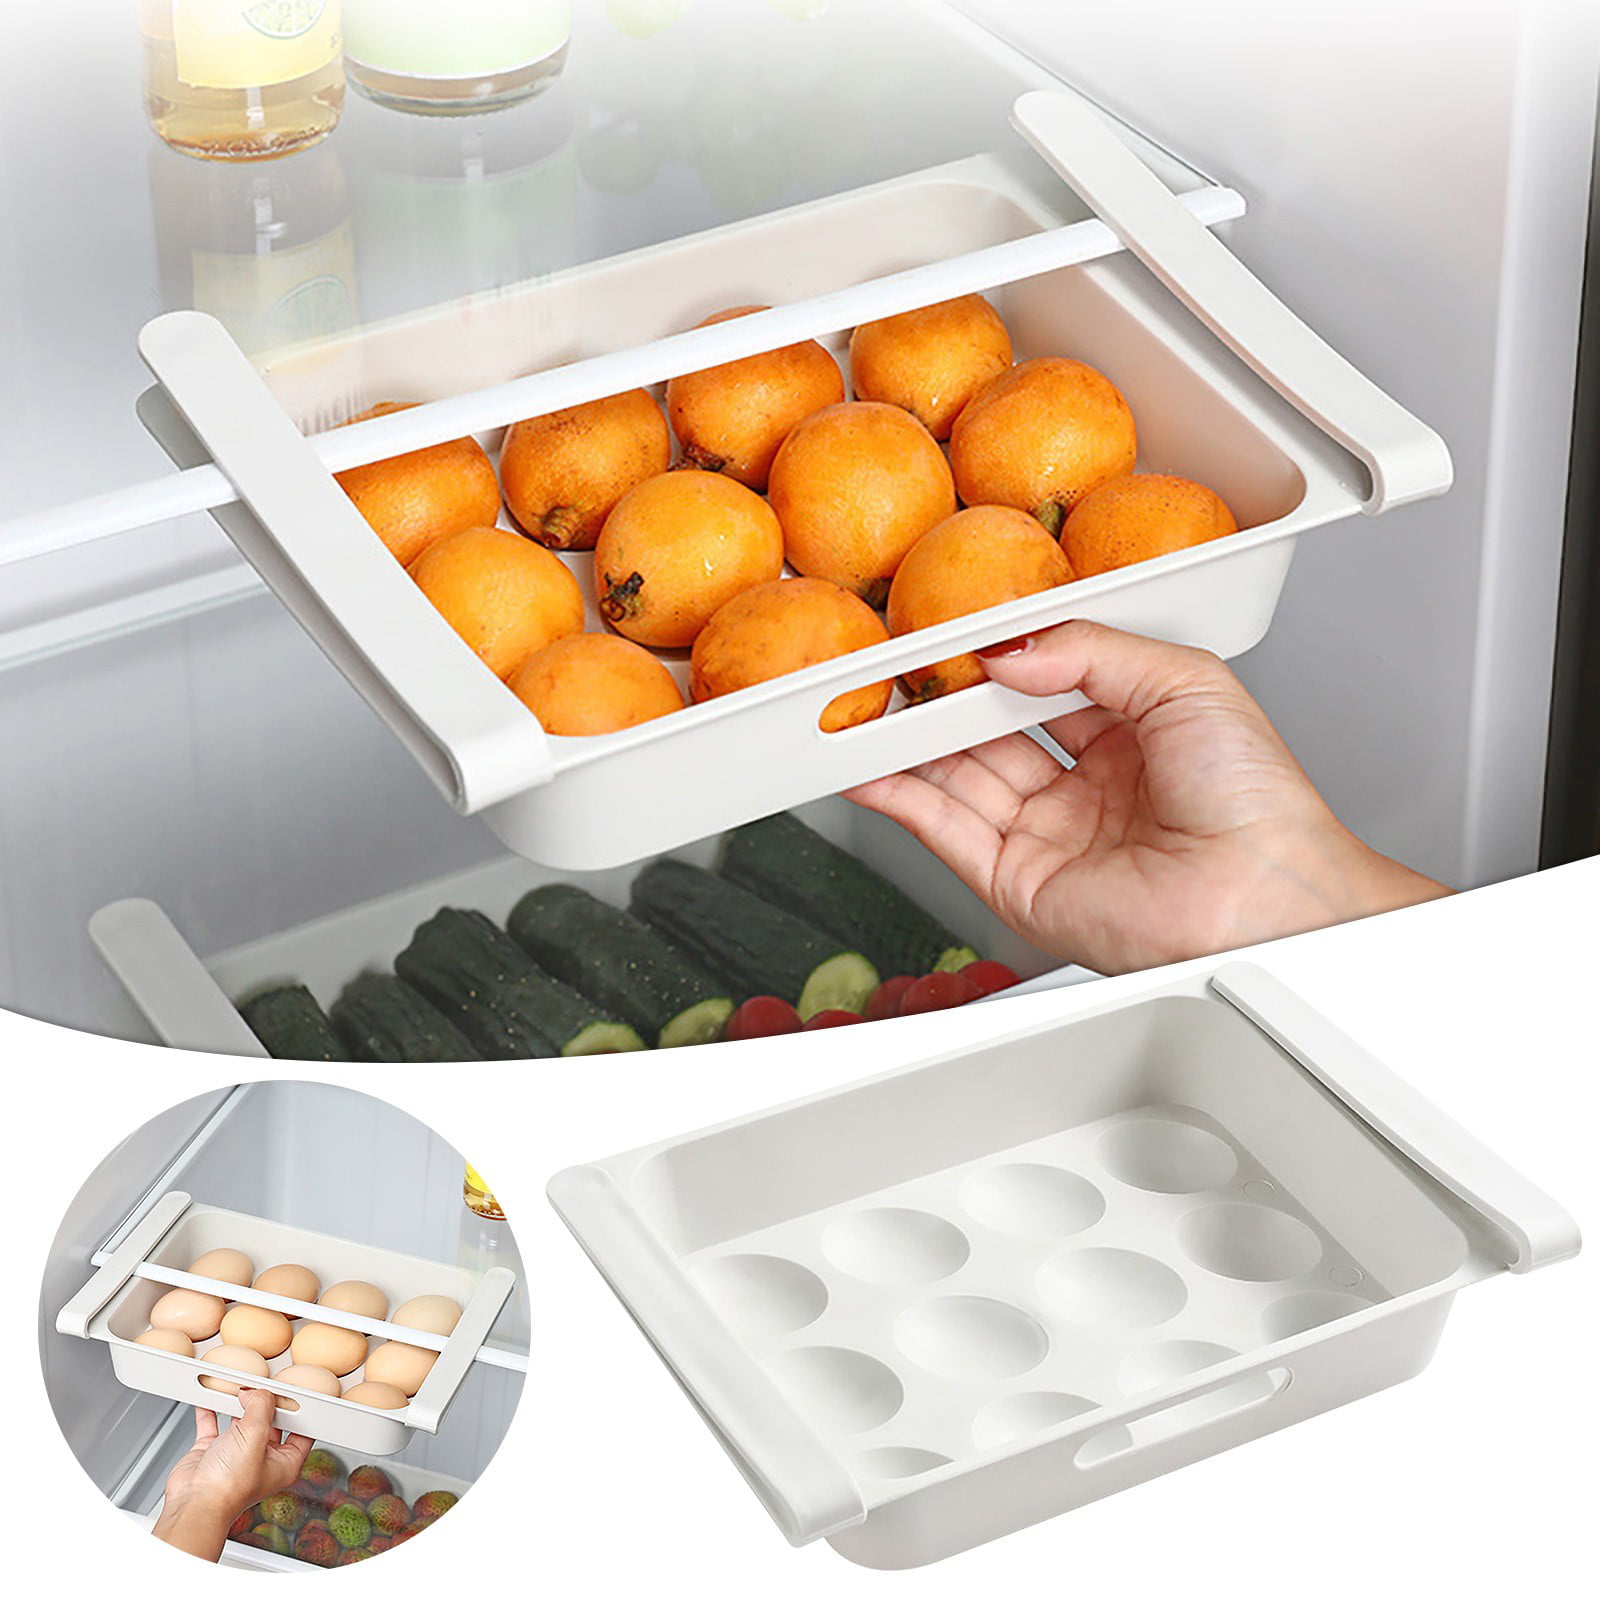 TUTUnaumb Holiday Rollback Deals 2023 Spring Household Multi-Layer Egg  Storage Container Organizer Bin Rotating Drawer Type Large Capacity Egg  Holder For Refrigerator Side Door Fresh-Keeping Box-Green 